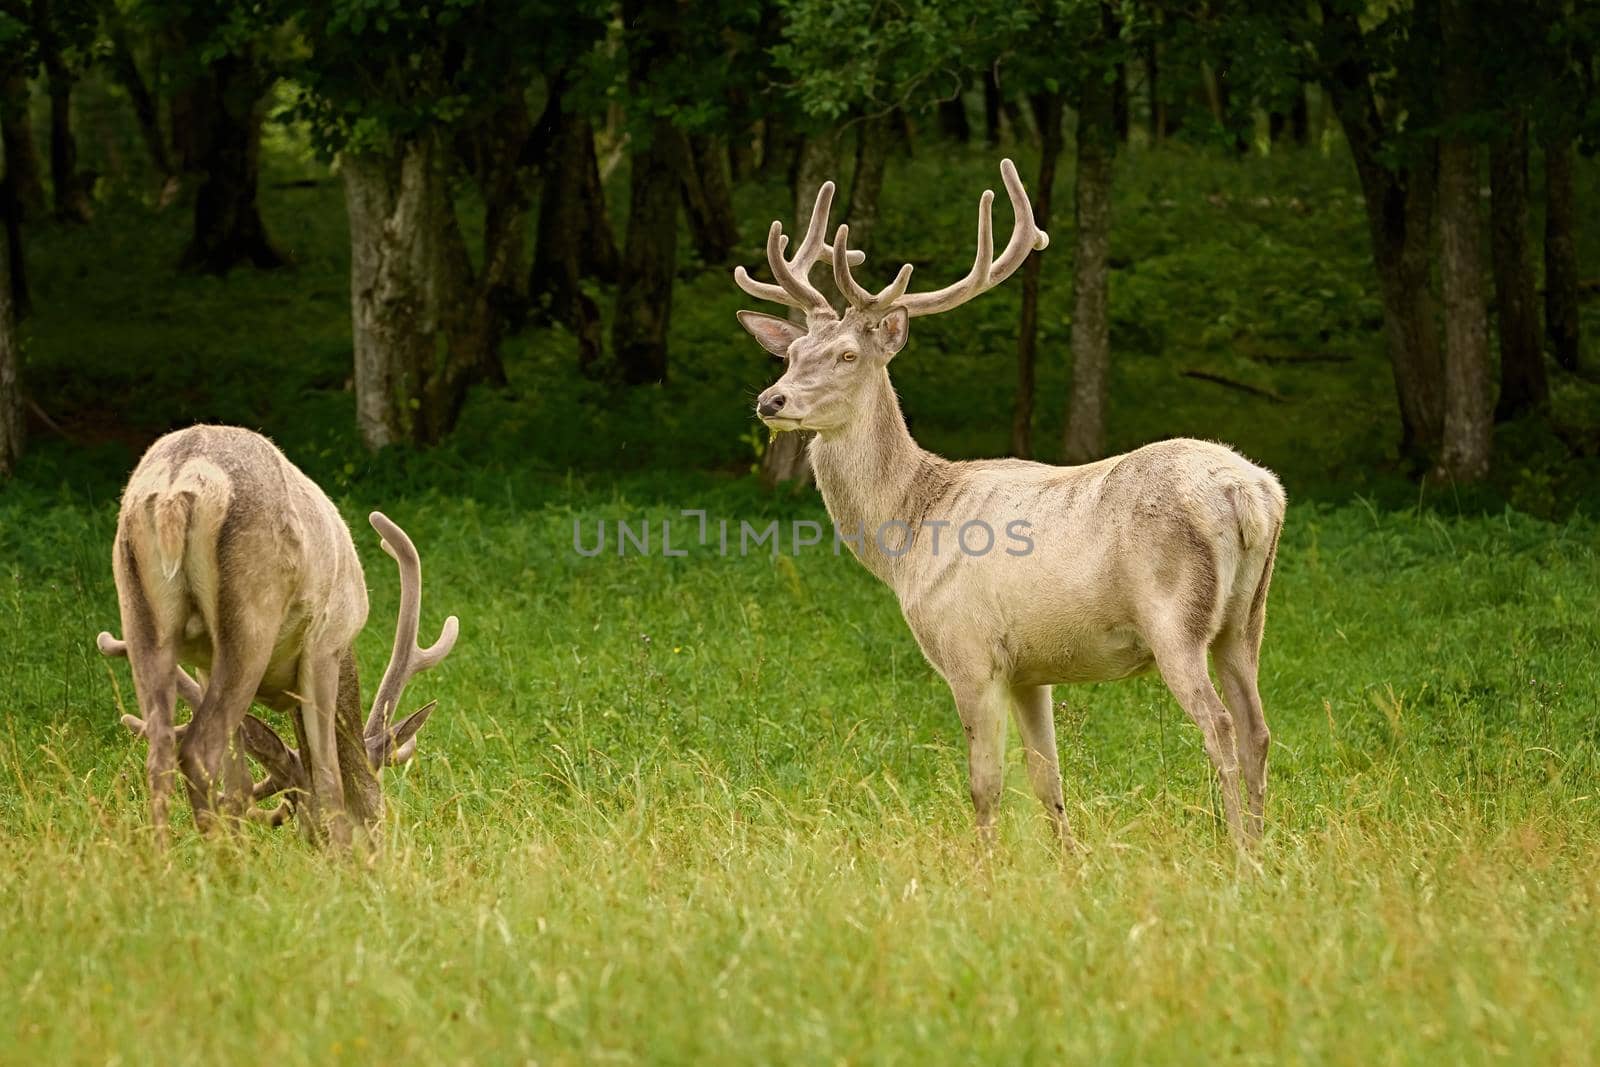 White deers at the lawn by SNR